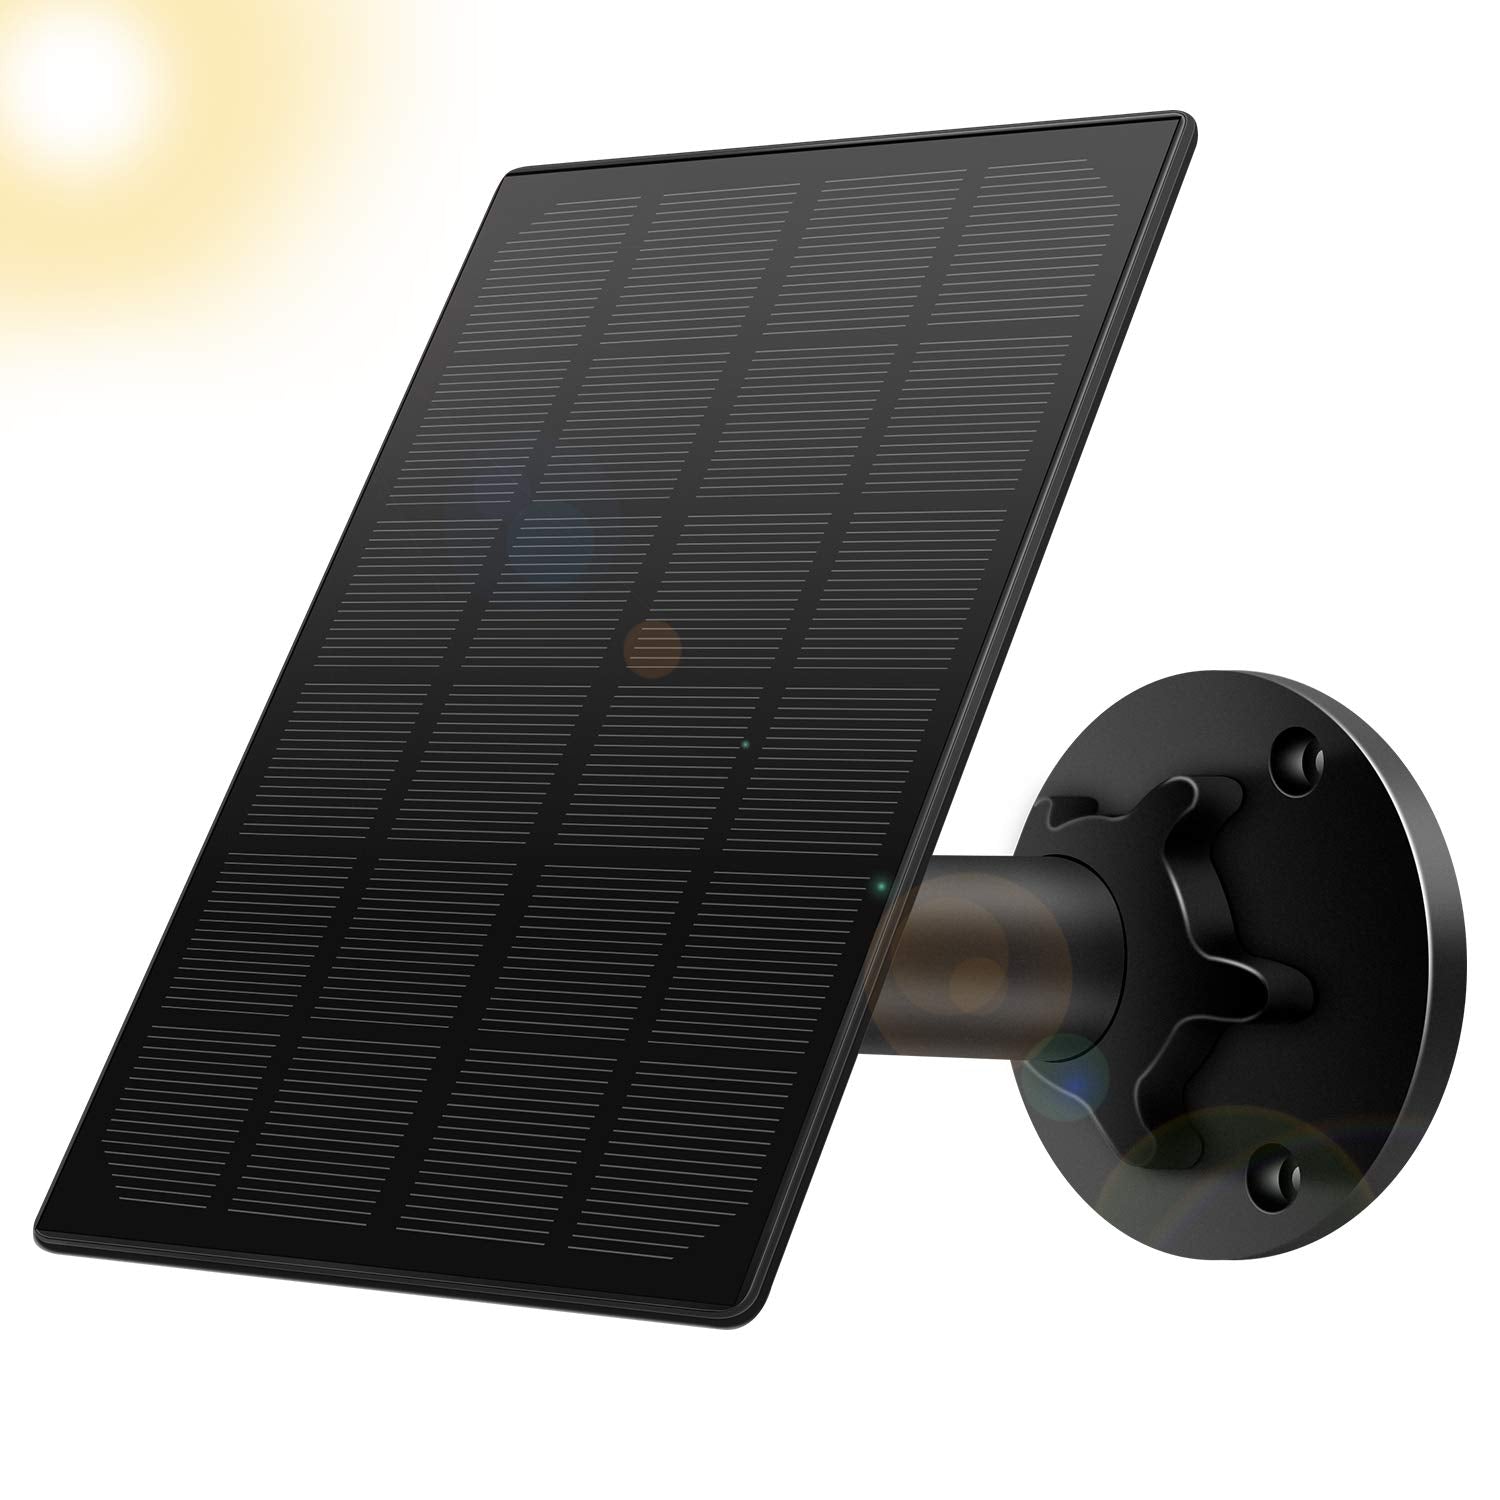 Solar Panel for Rechargeable Battery Outdoor Camera,Waterproof Solar Panel with 12ft USB Cable, Continuously Power for Outdoor Security Camera,5V 3.5W Micro USB Port - Home Decor Gifts and More